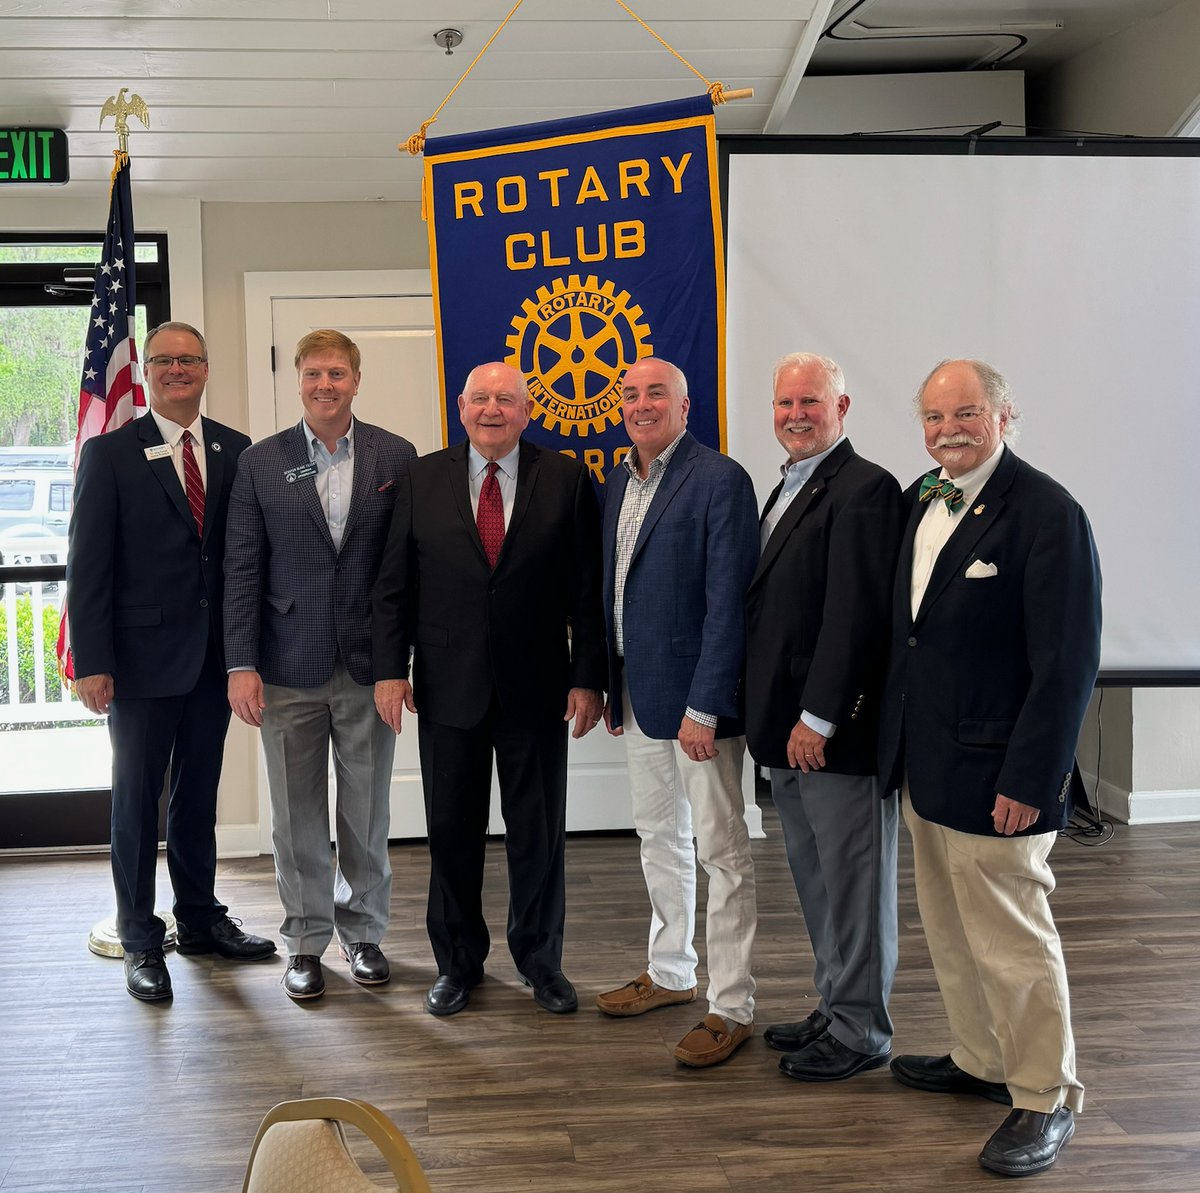 Happy to join Regent Patrick Jones, @southGAstate interim President Greg Tanner, Chairman Blake Tillery and others at this afternoon’s Waycross Rotary Club meeting. Appreciate your support for our public colleges and universities!